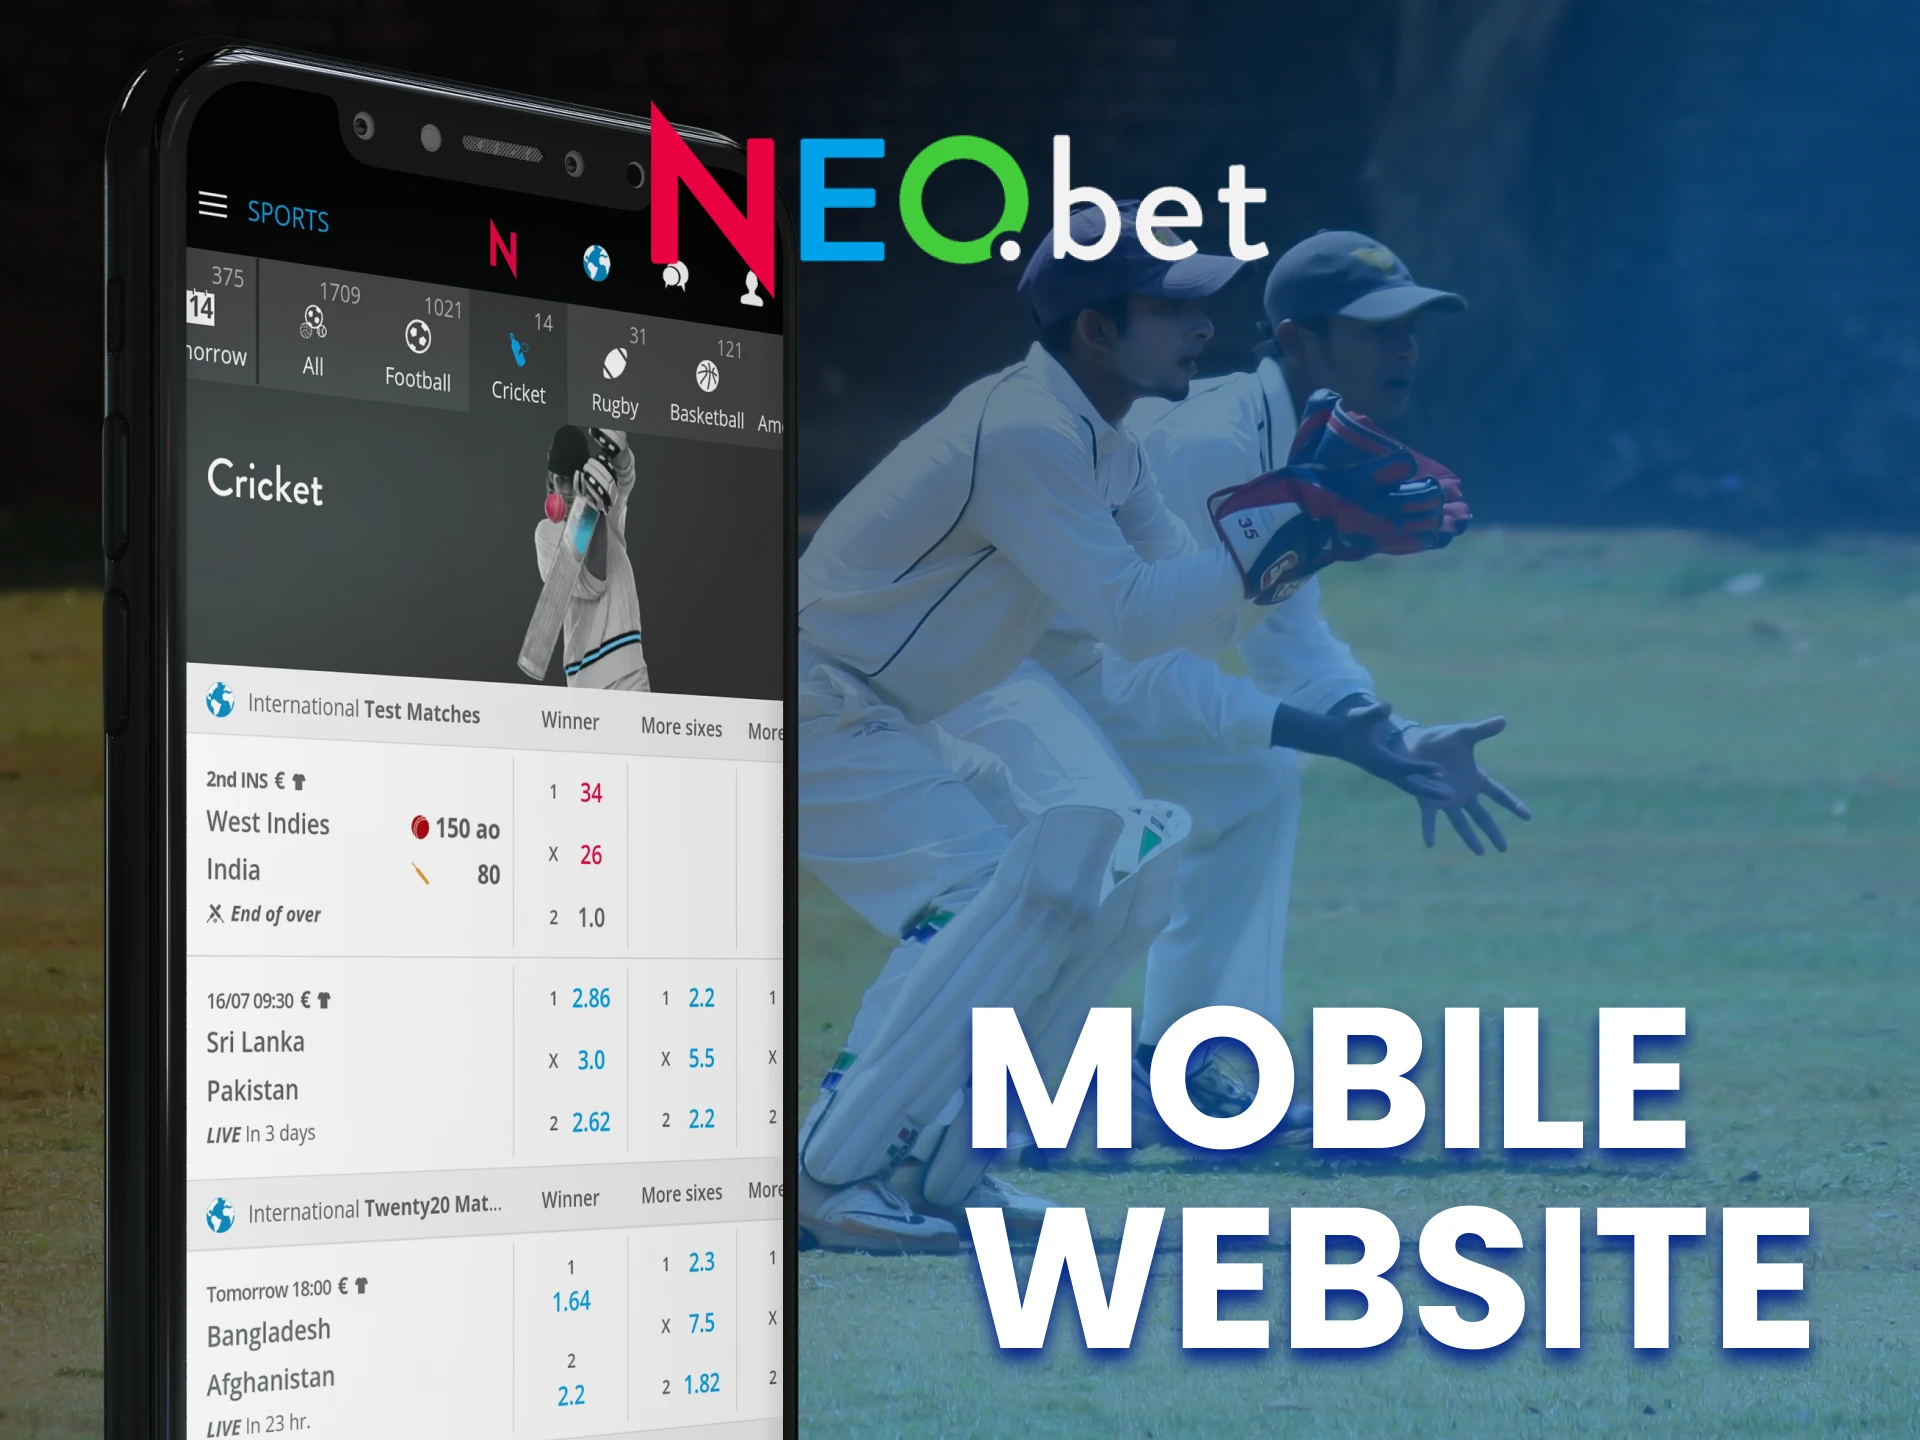 Play casino and sports betting with NEO.bet via the mobile version of the website.